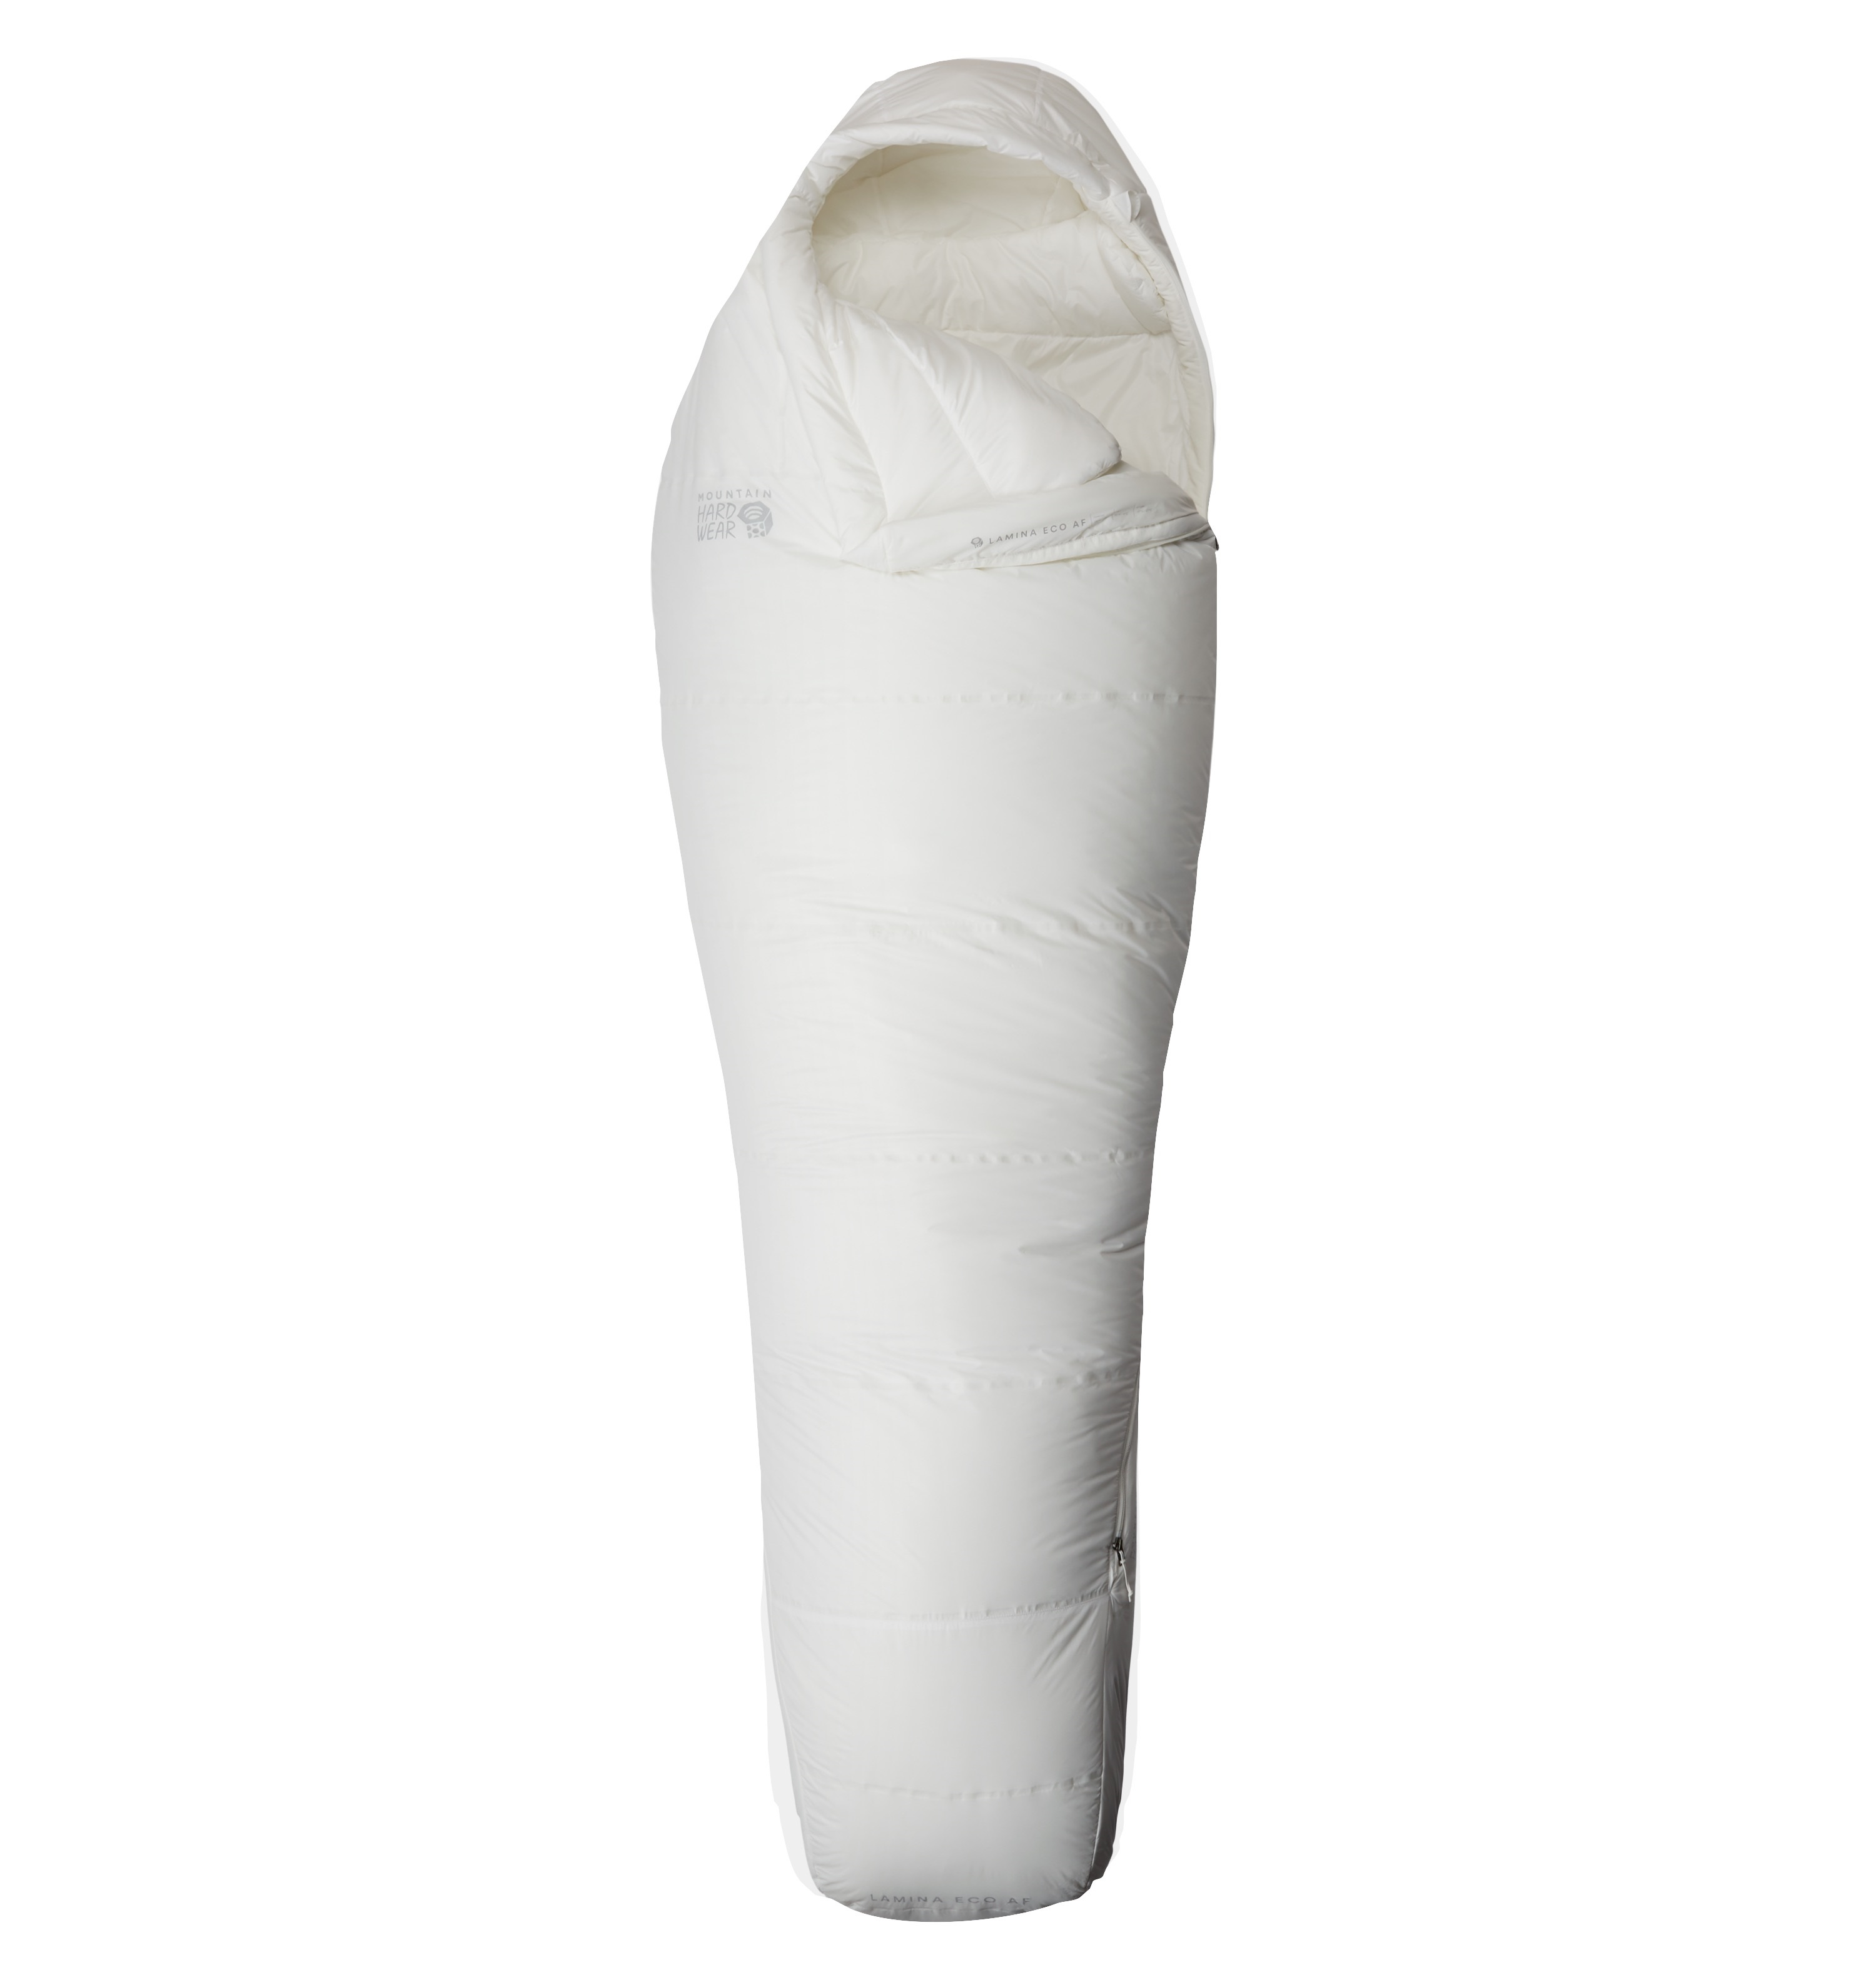 What degree rating do you recommend for a year-round sleeping bag?